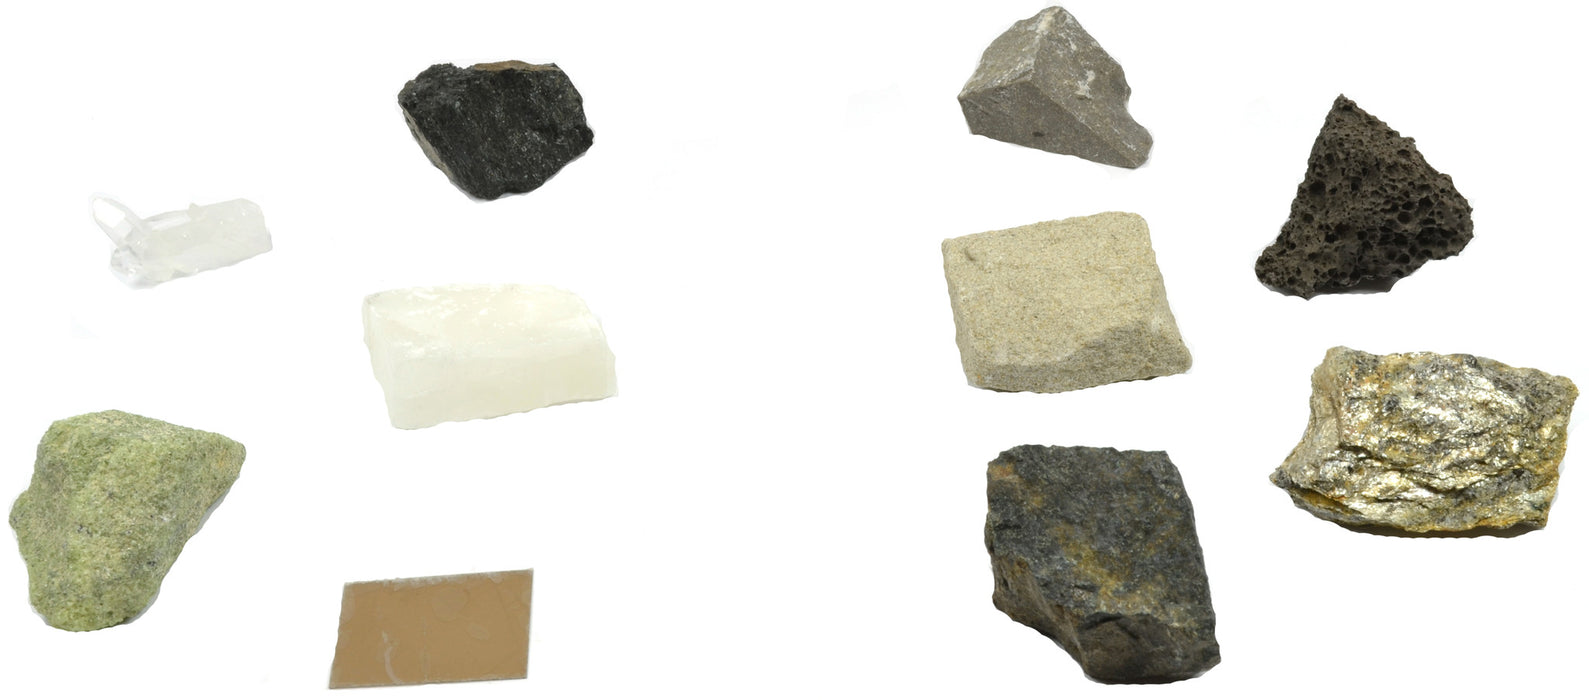 Rock/Mineral Matching Game - Set of 10 Rock and Mineral Specimens